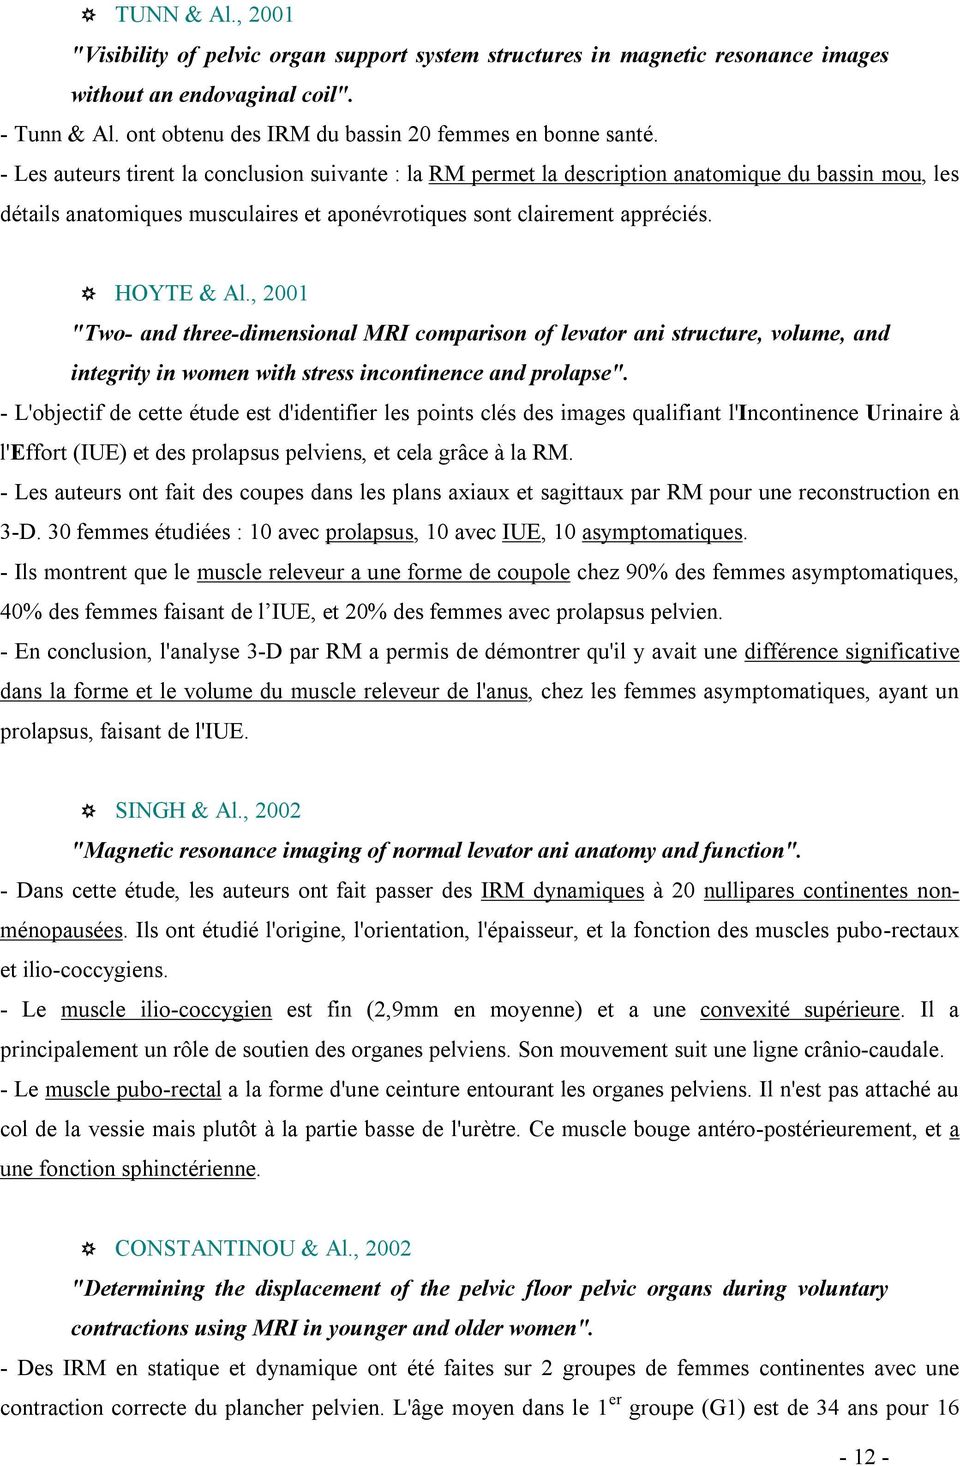 , 2001 "Two- and three-dimensional MRI comparison of levator ani structure, volume, and integrity in women with stress incontinence and prolapse".